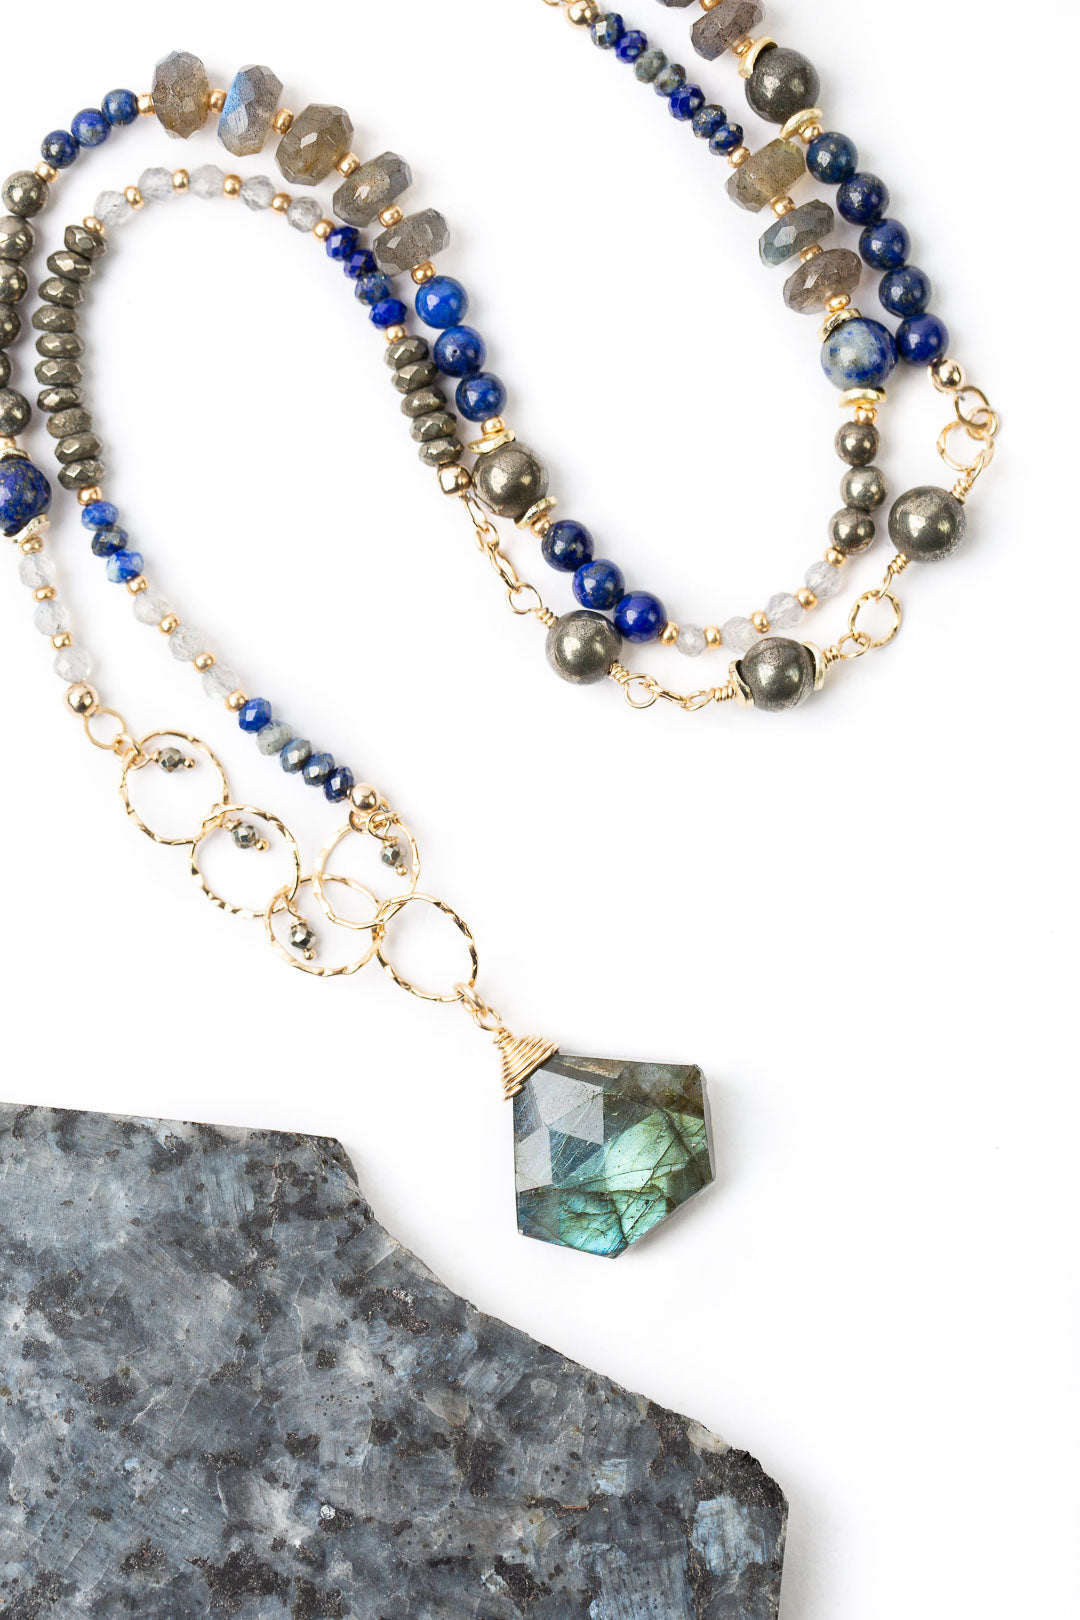 Blue Moon 32.5-34.5" Lapis With Labradorite And Pyrite Collage Necklace